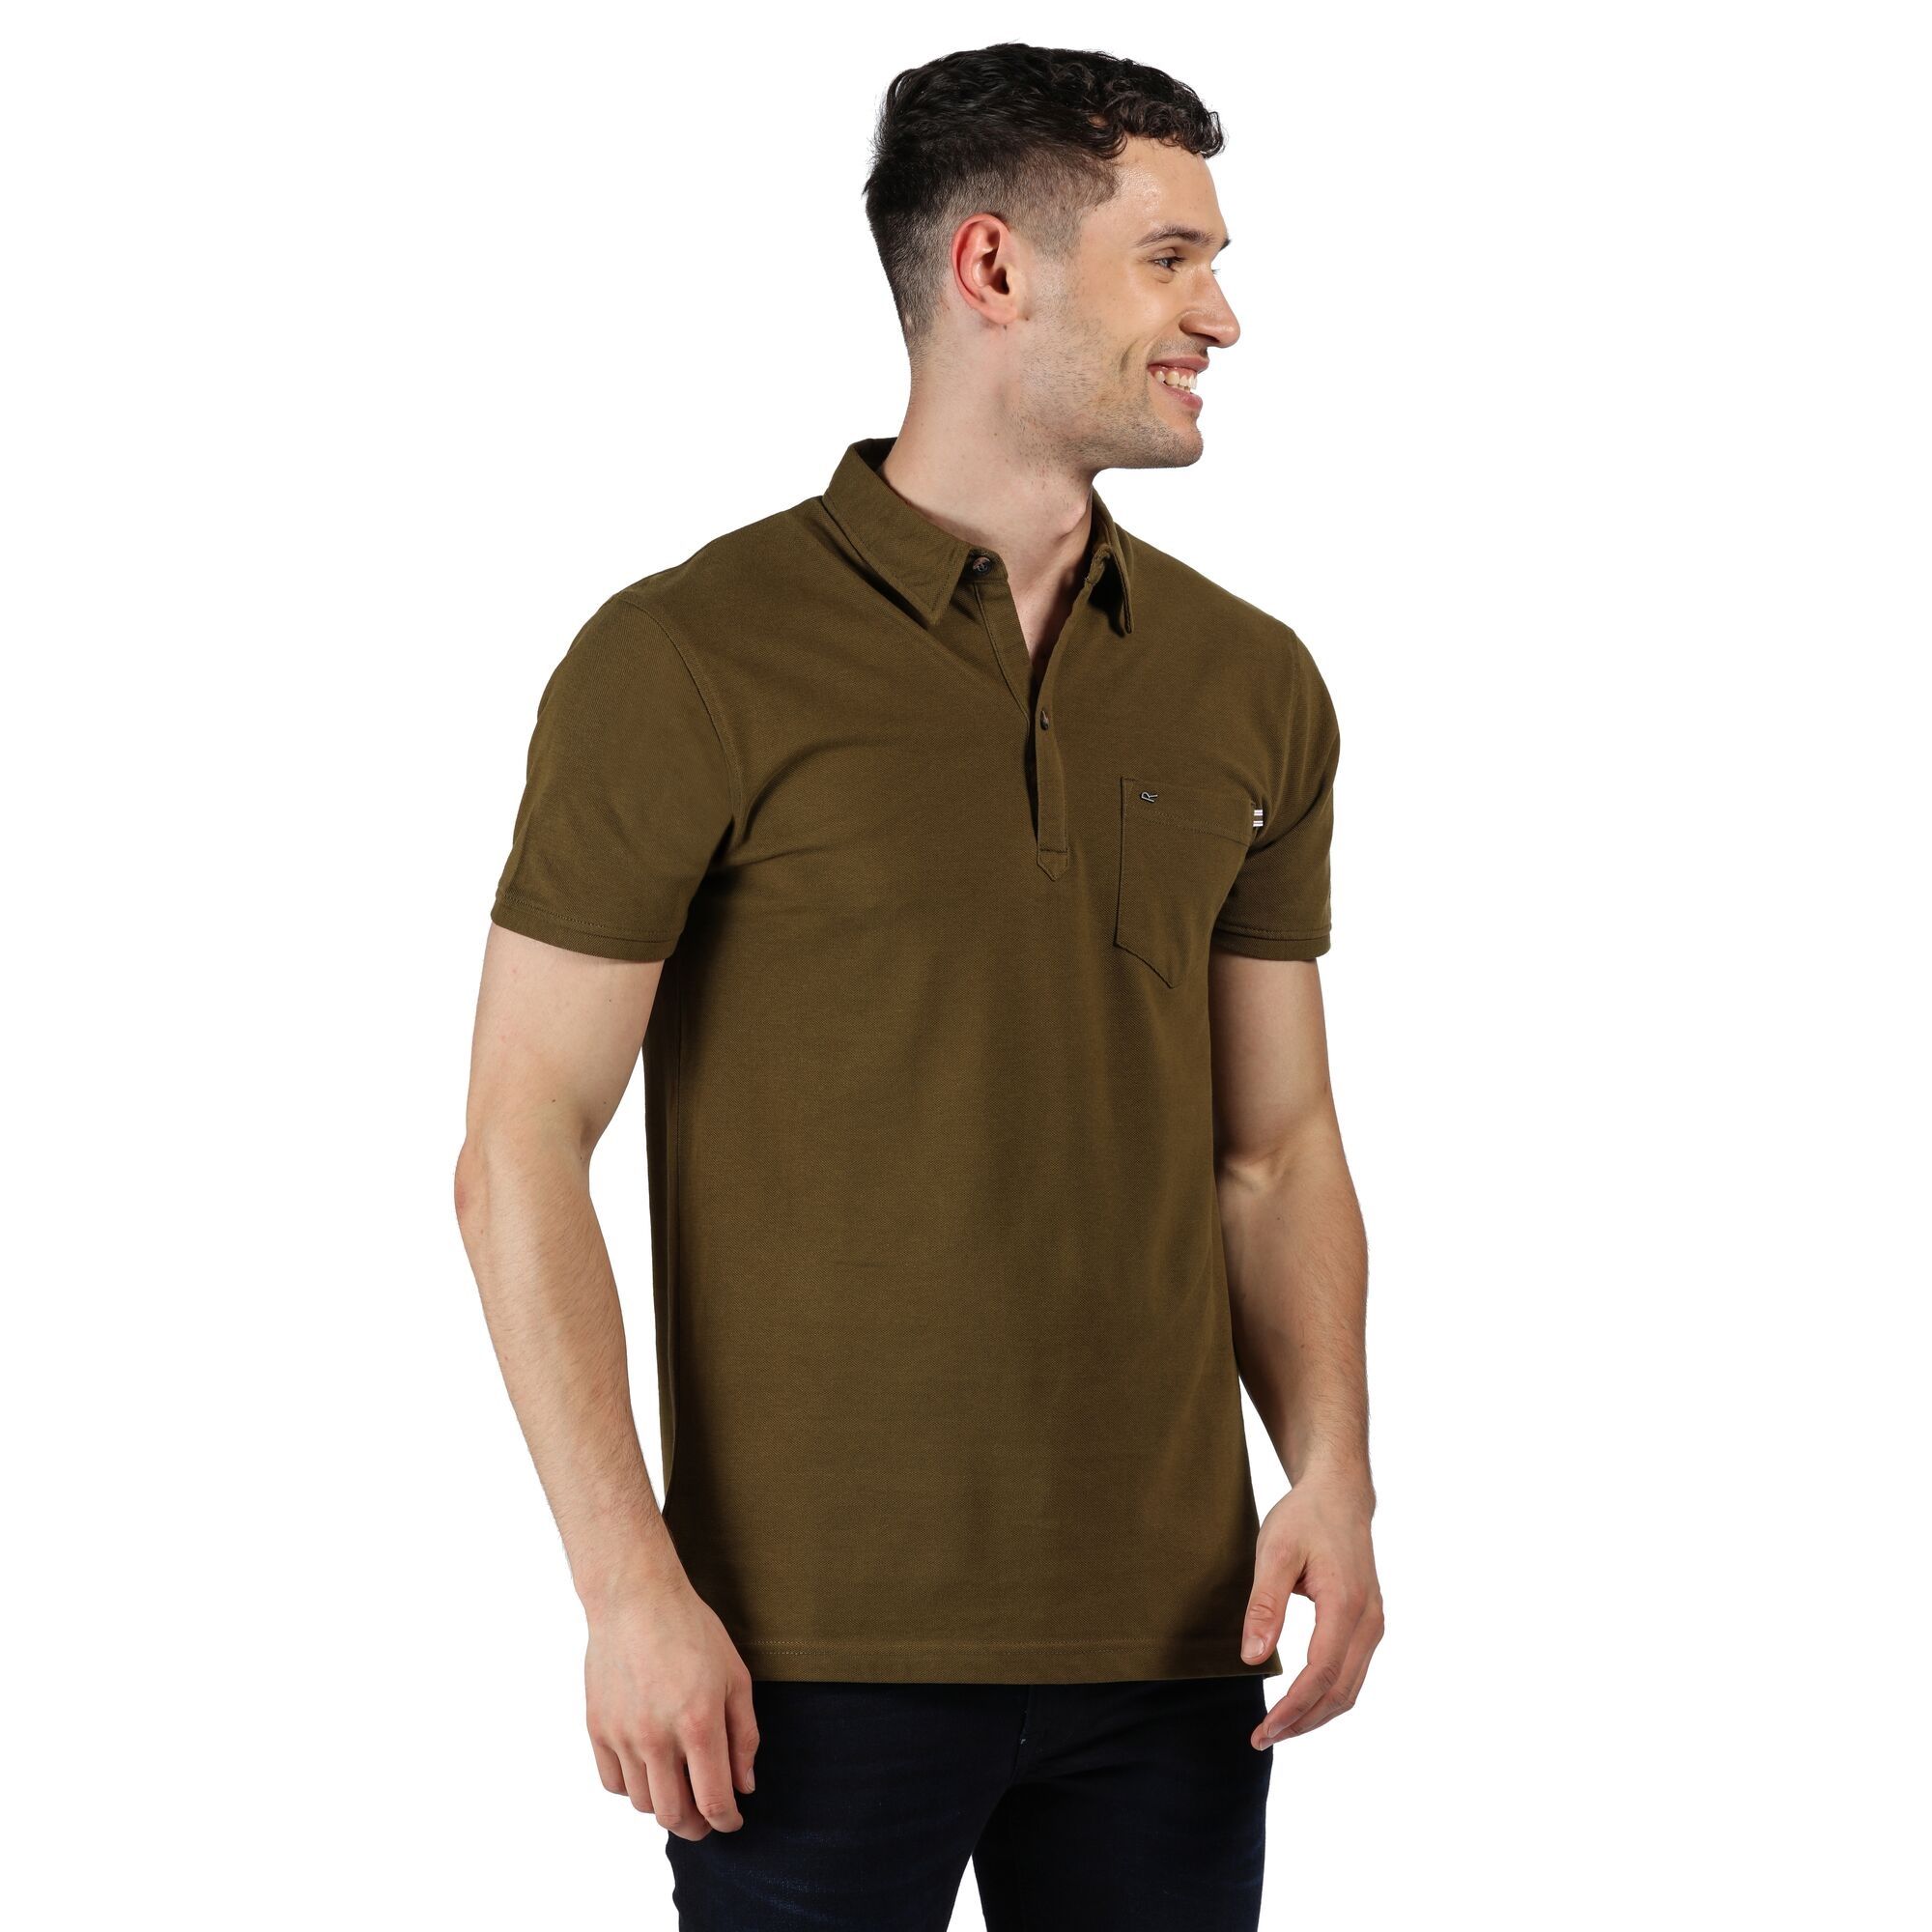 Material: 100% cotton pique fabric. 2 Button placket with dyed to match branded buttons. Double cuff feature. 1 chest pocket.